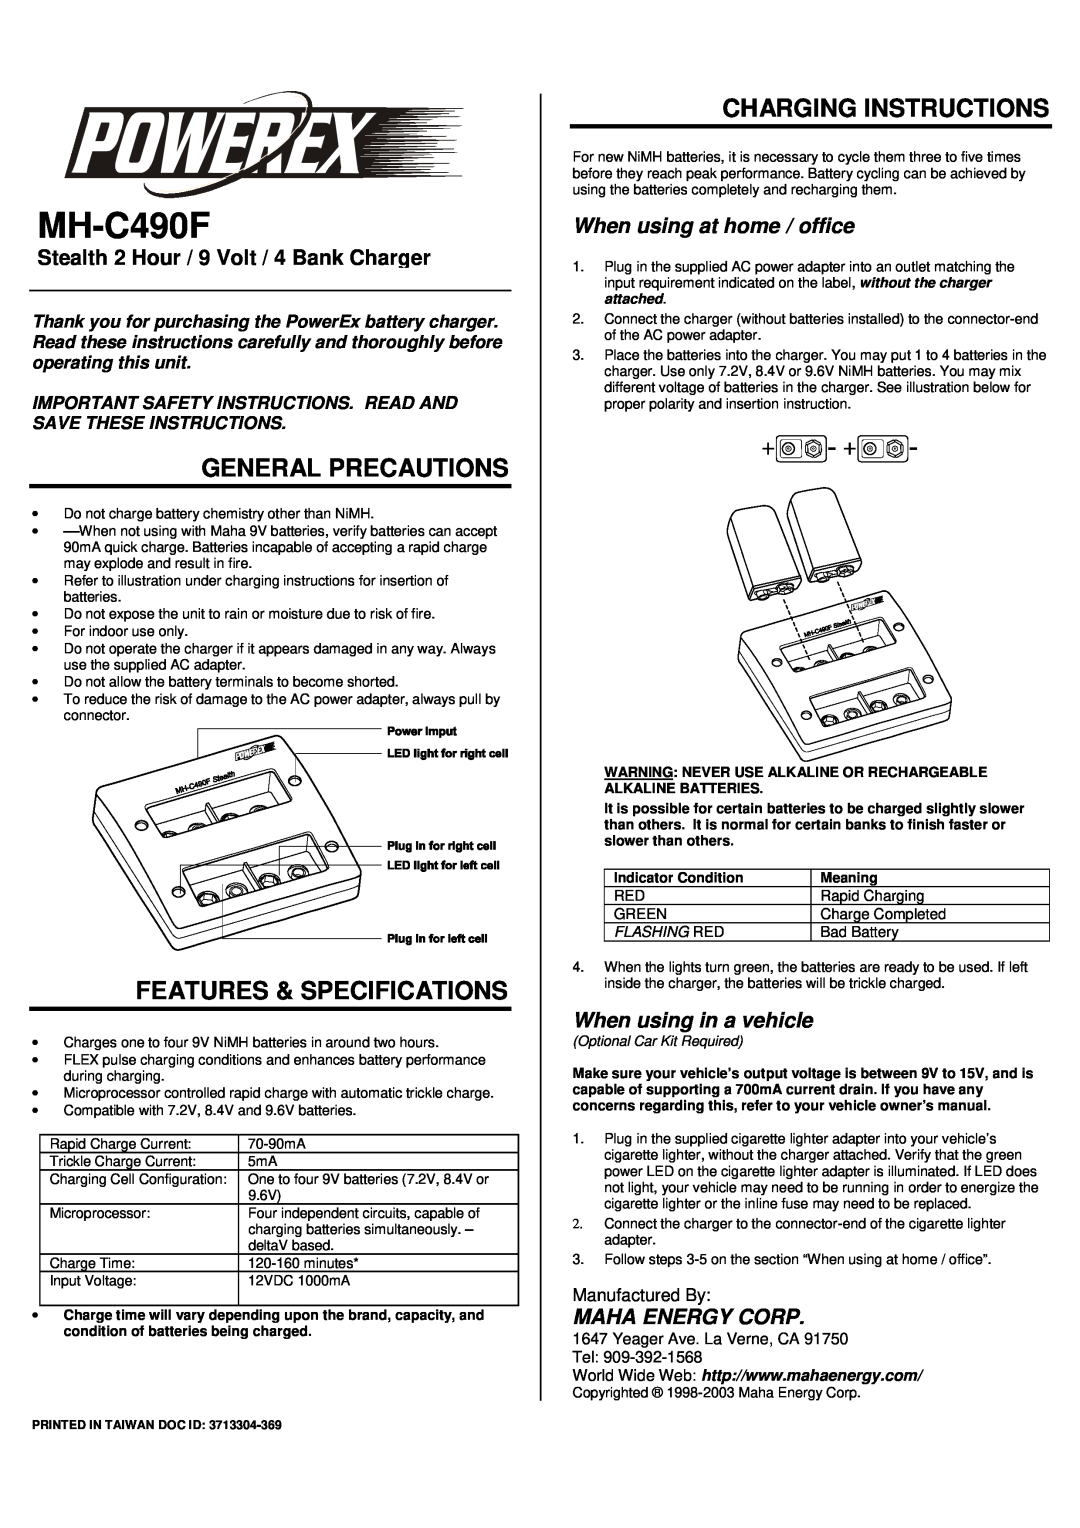 Maha Energy MH-C490F manual General Precautions, Features & Specifications, Charging Instructions, When using in a vehicle 